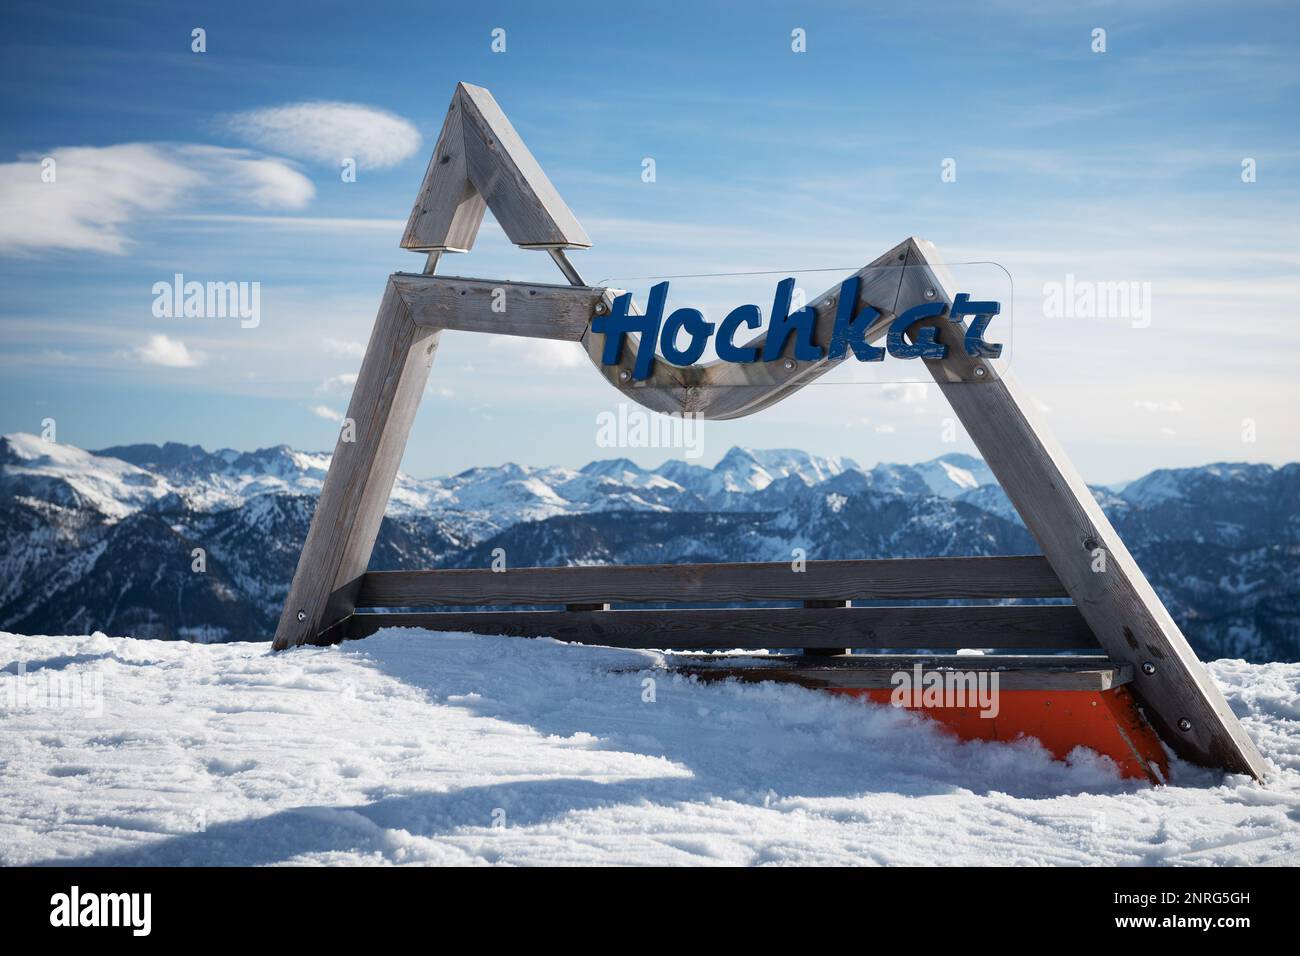 Hochkar sign on top of peak at skiing resort in Lower Austria during winter. Stock Photo